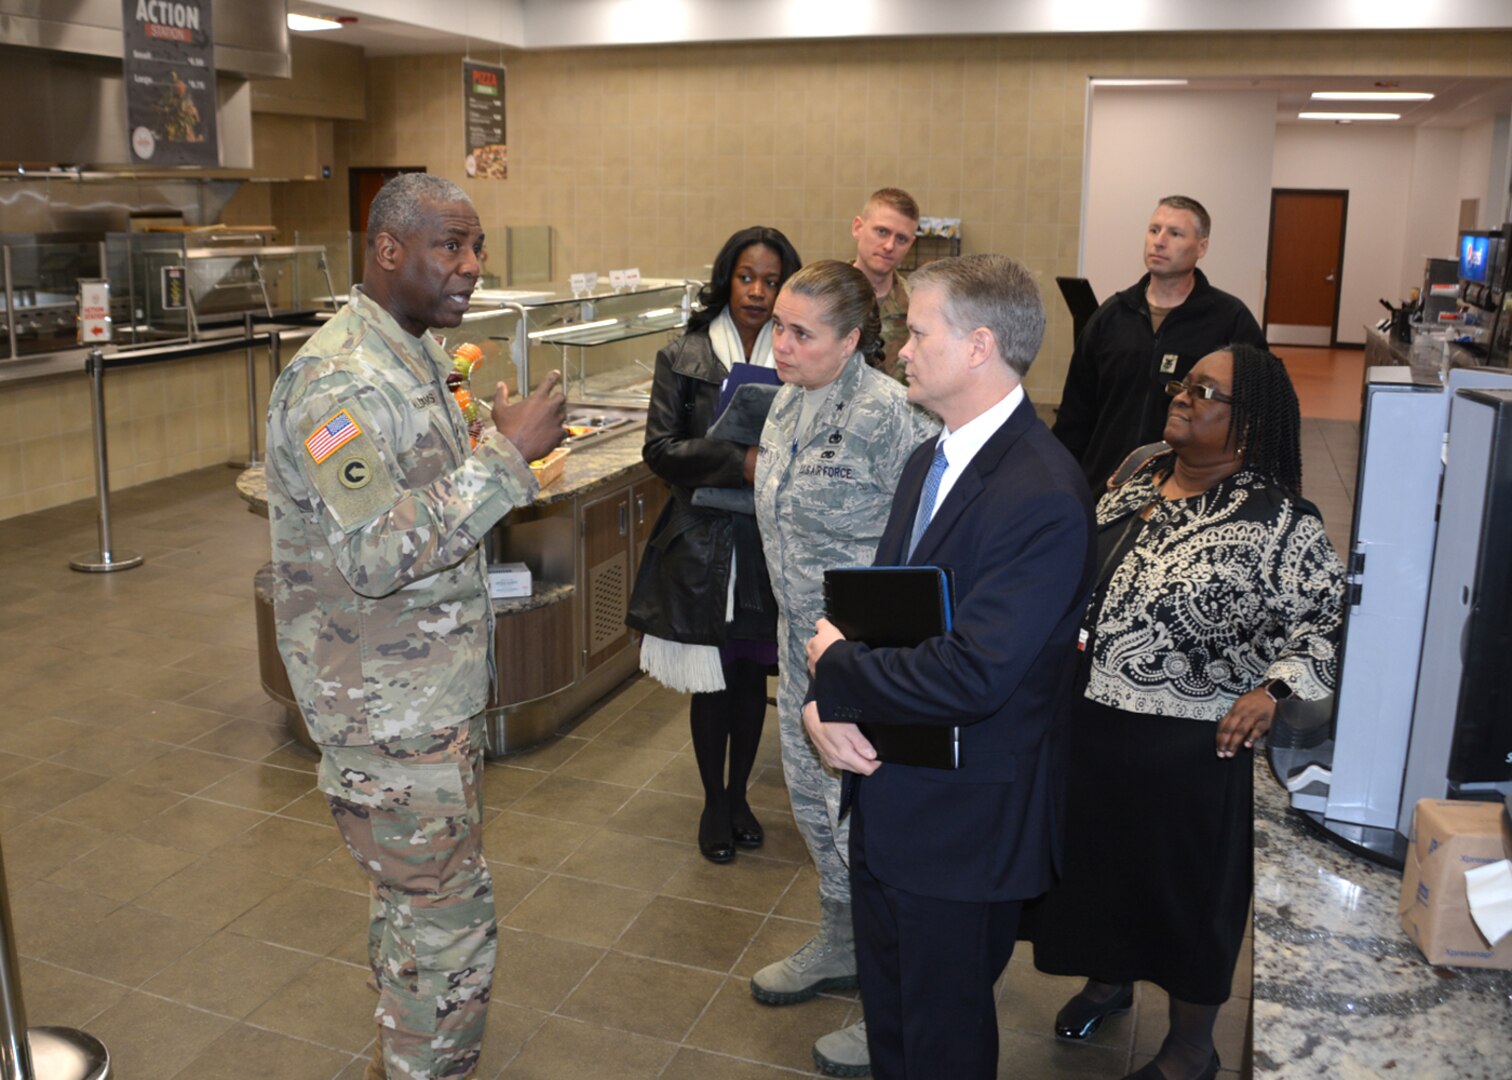 DLA director visits DLA Aviation, learns activity is on track to meet operating plan goals